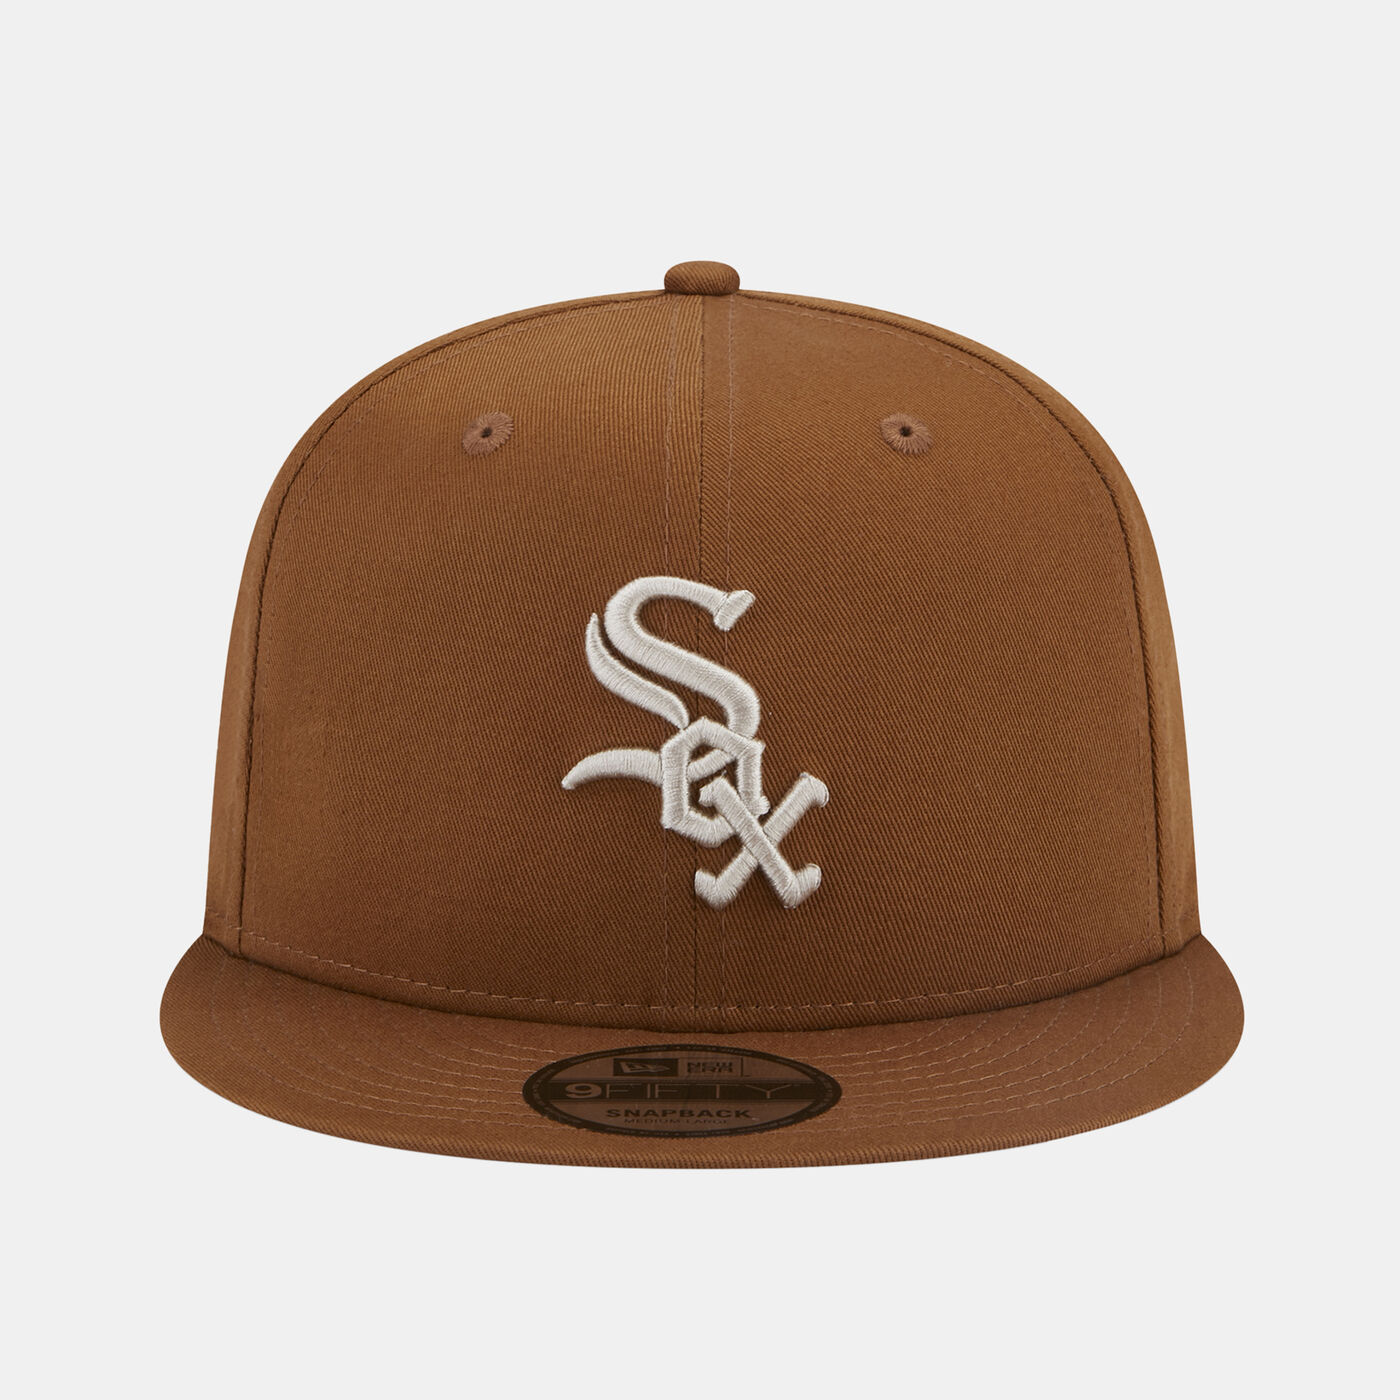 Men's Chicago White Sox Side Patch 9FIFTY Cap